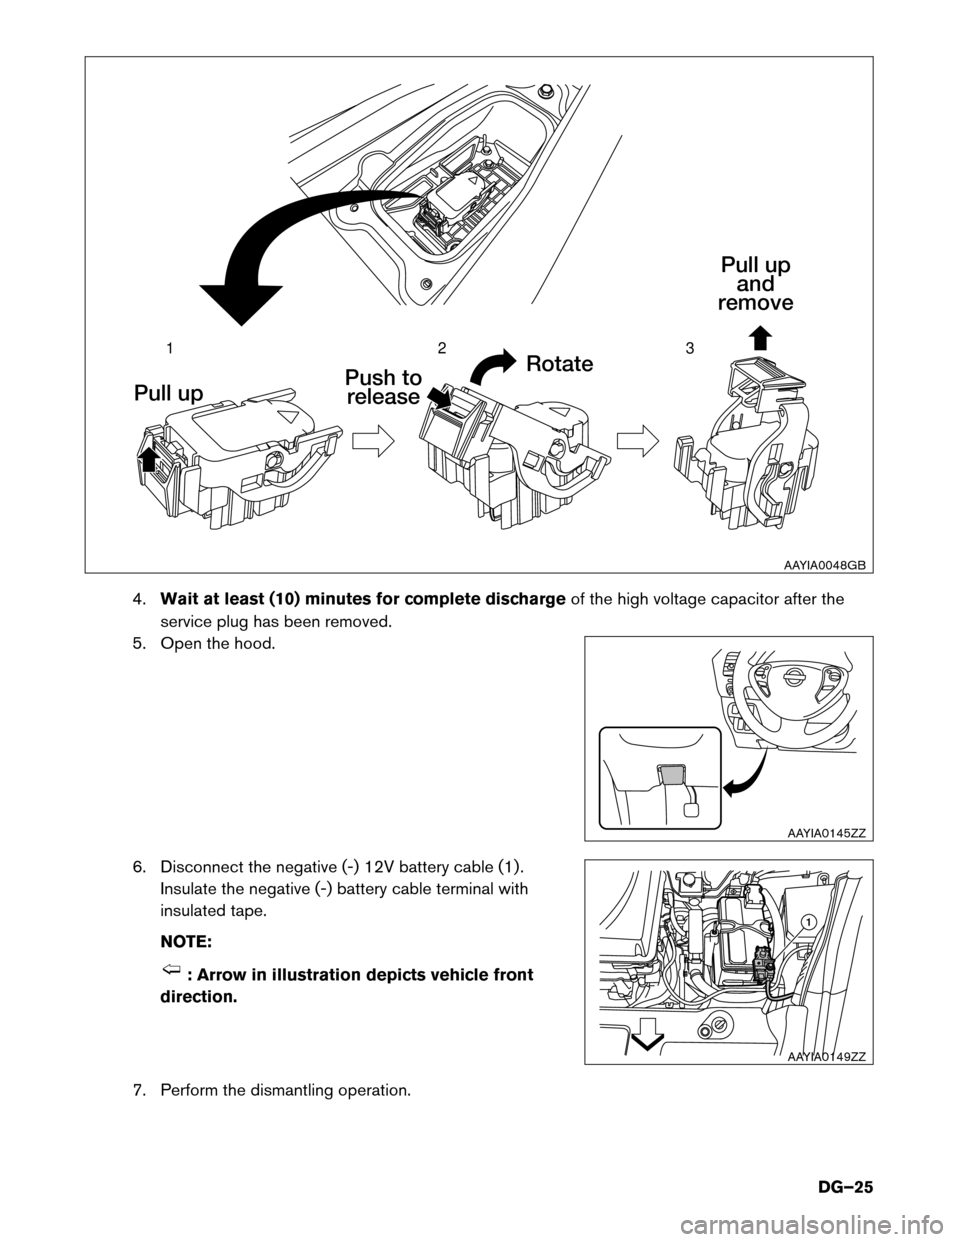 NISSAN LEAF 2015 1.G Dismantling Guide 4.
Waitat least (10) minutes for complete discharge of the high voltage capacitor after the
service plug has been removed.
5. Open the hood.
6. Disconnect the negative (-) 12V battery cable (1) . Insu